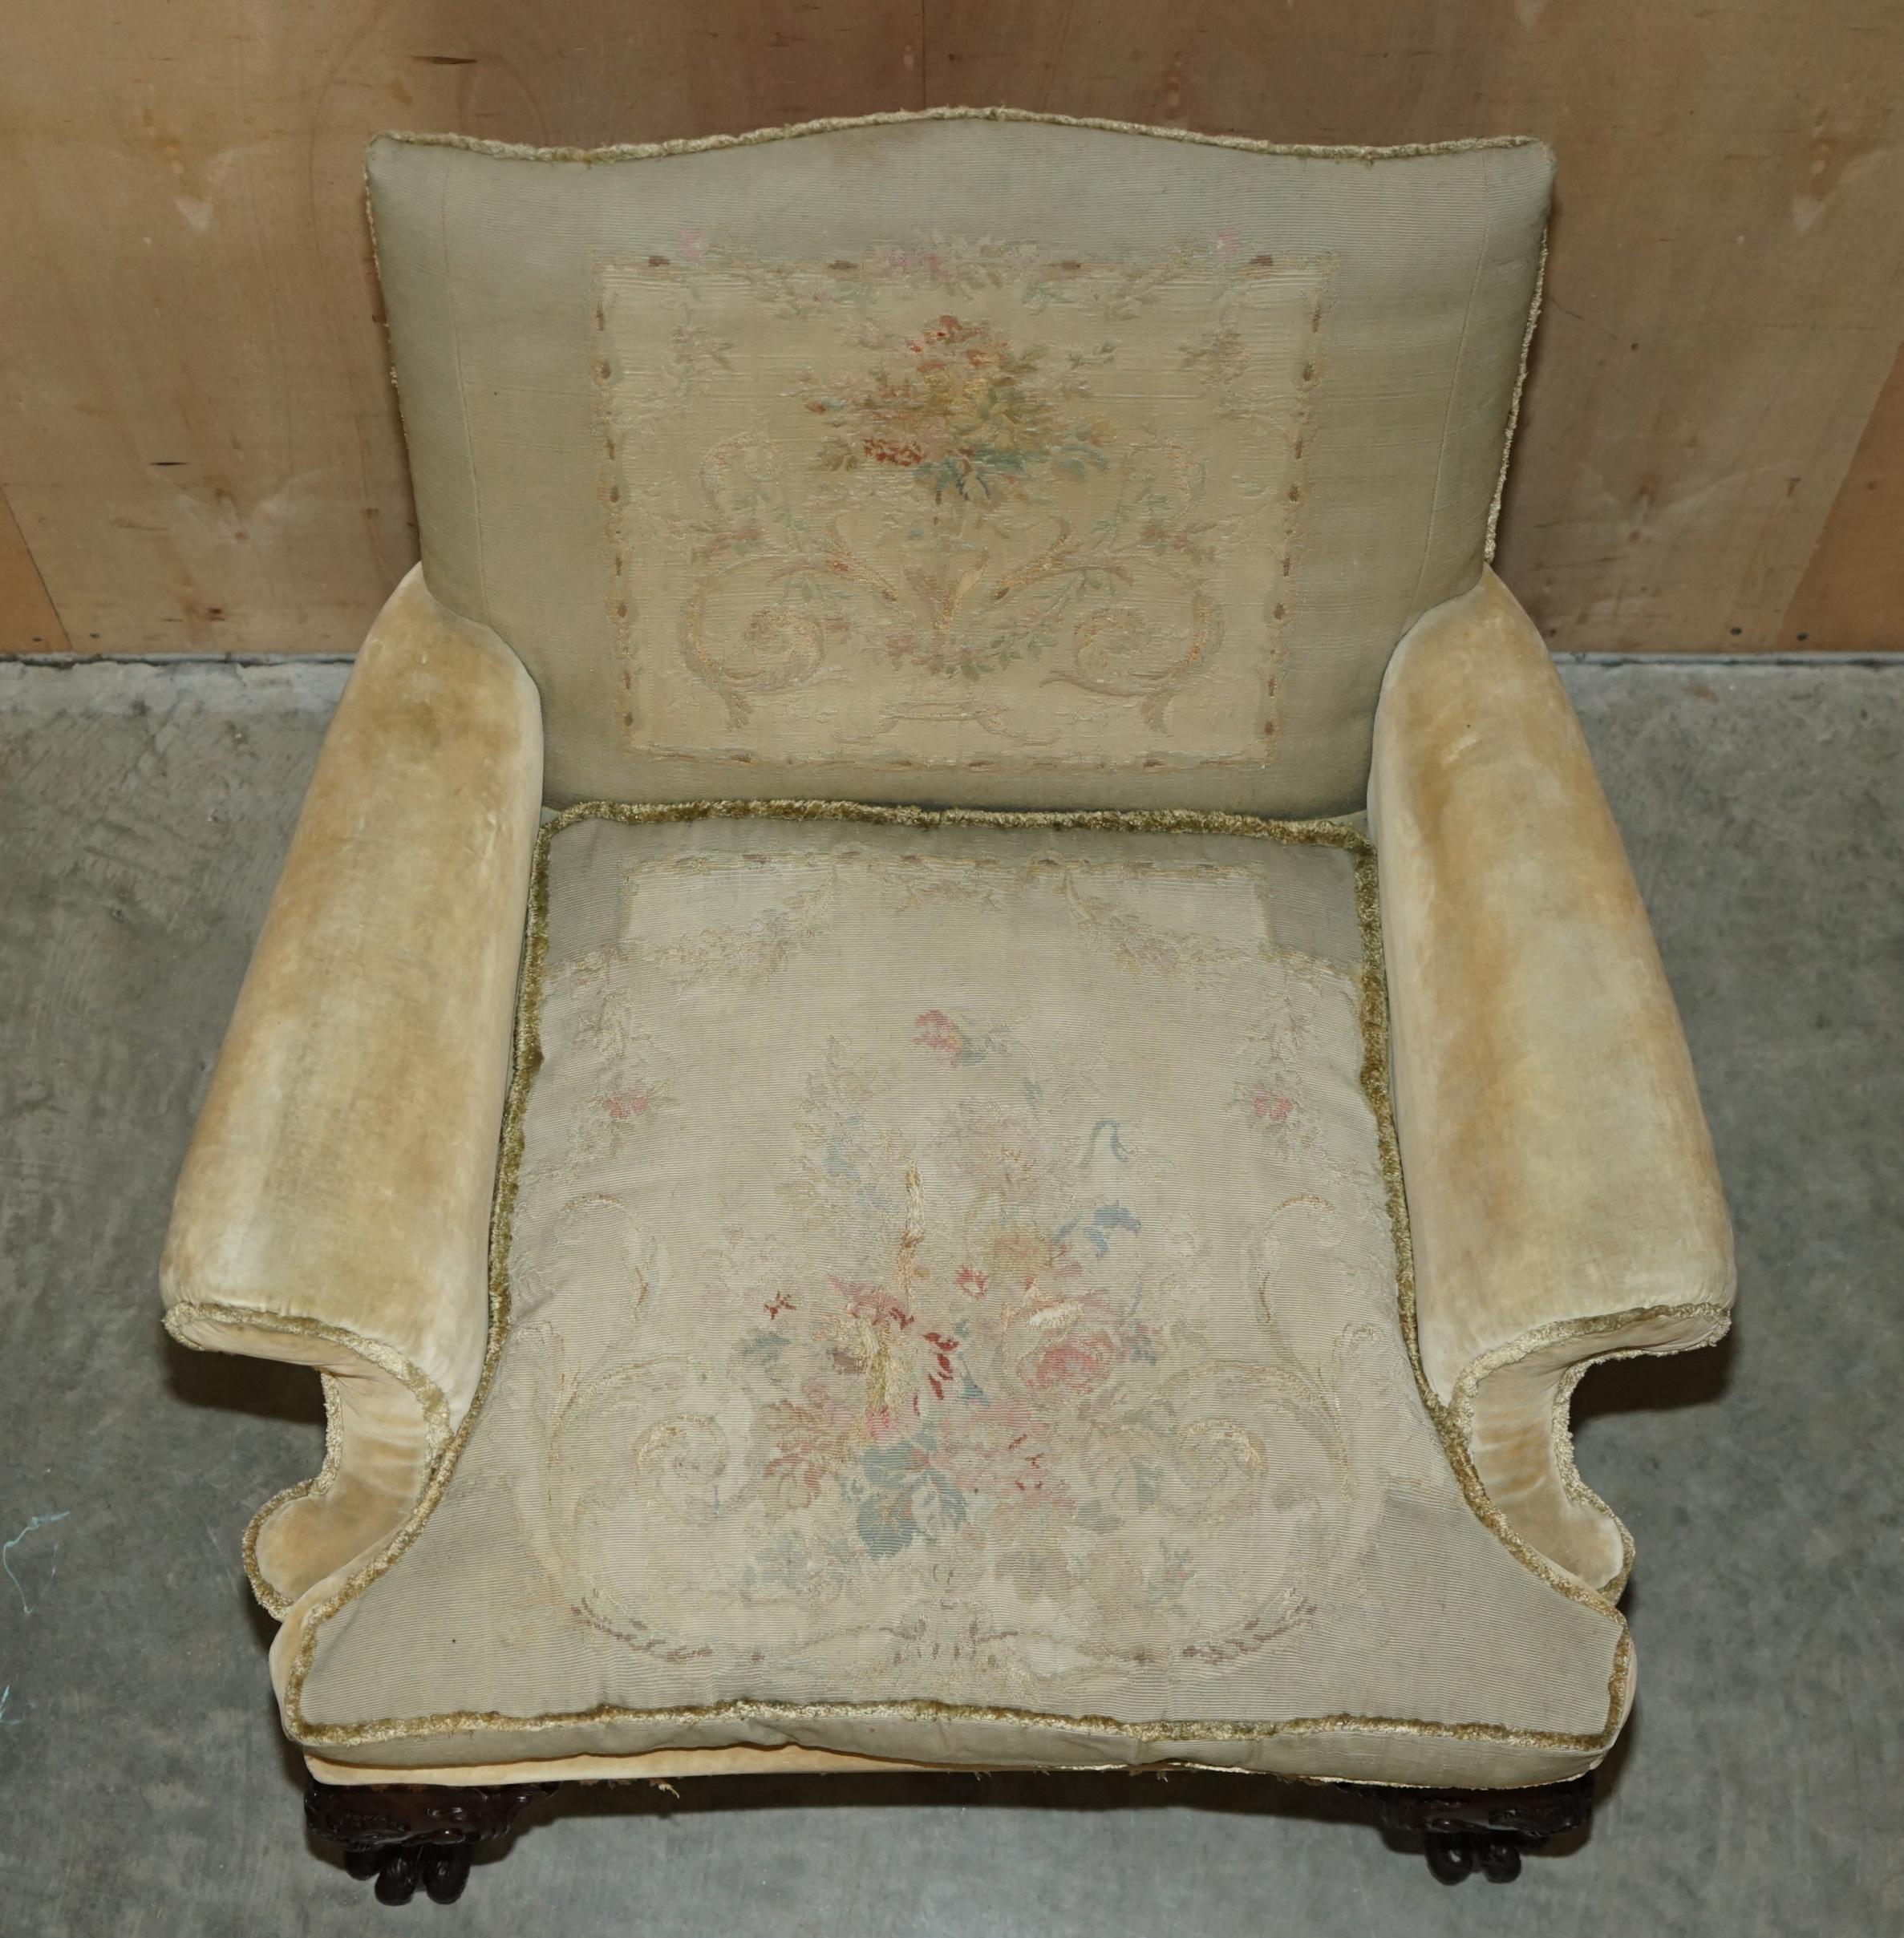 GEORGE III HAND CARVED CIRCA 1780 ANTIQUE LIONS PAW ARMCHAIRs im Angebot 3